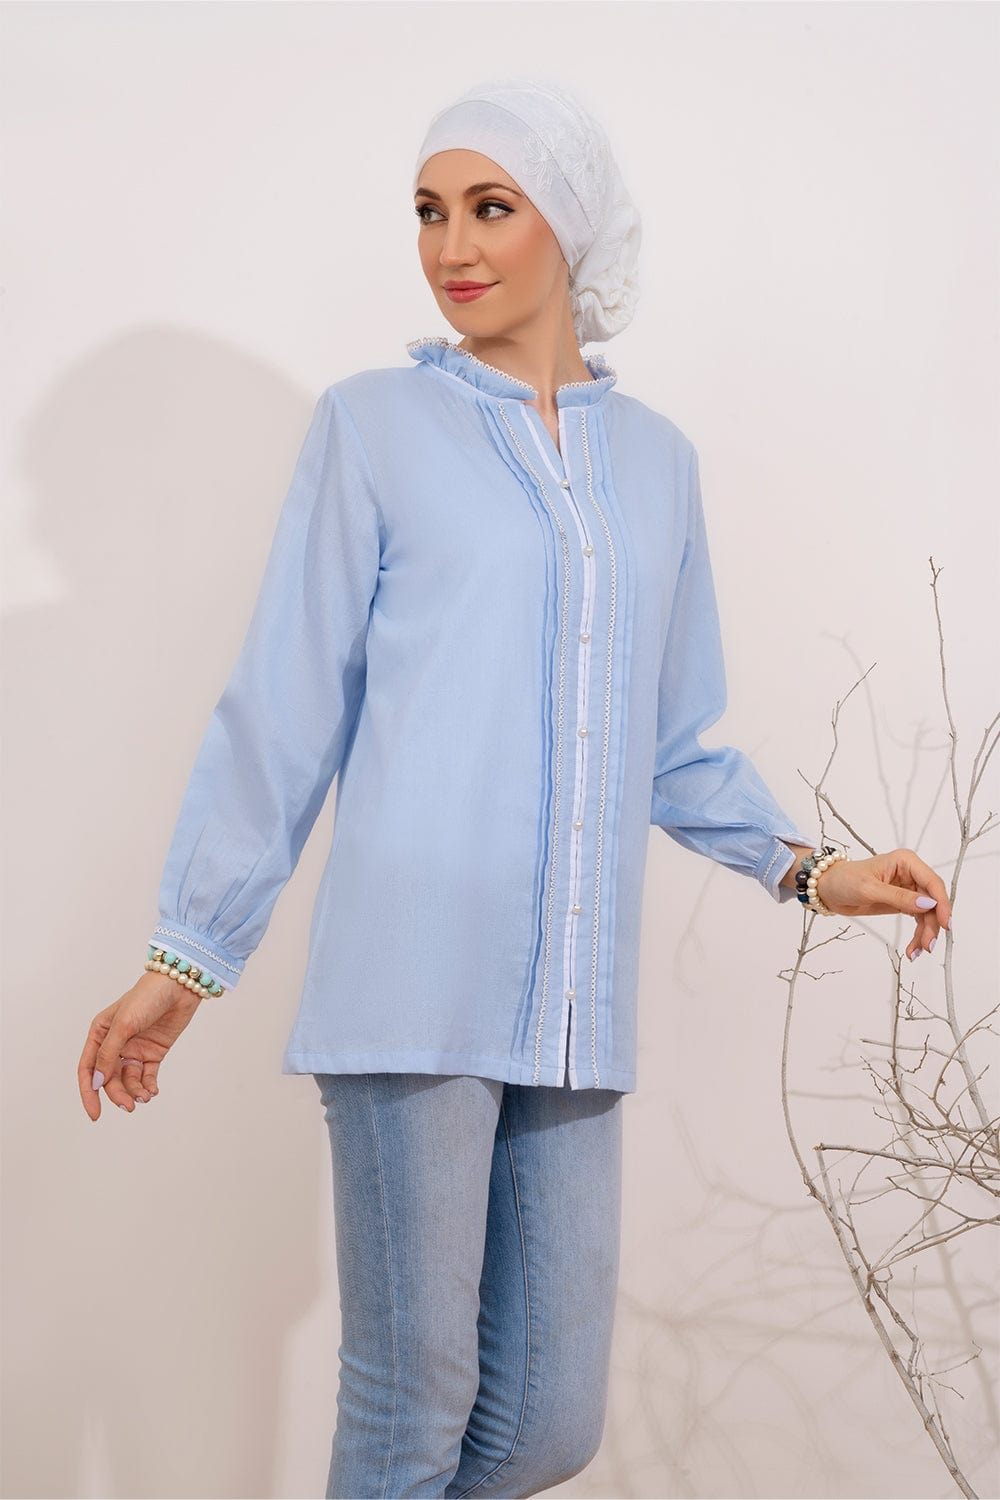 Hope Not Out by Shahid Afridi Eastern Women Shirts Floral Blue Textured With Lace Detailing Button Down Top